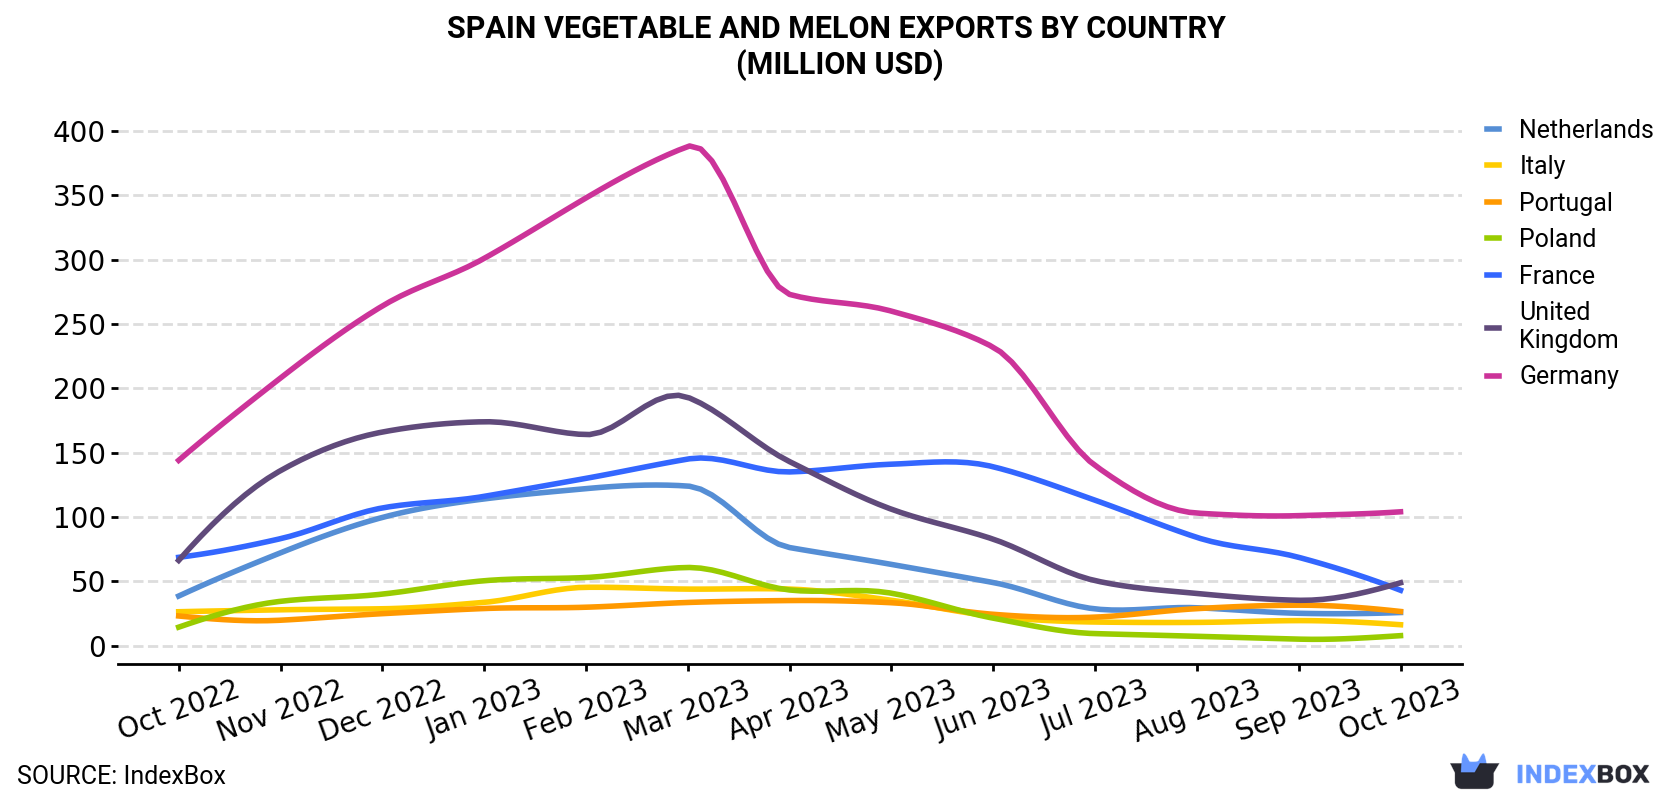 Spain Vegetable and Melon Exports By Country (Million USD)